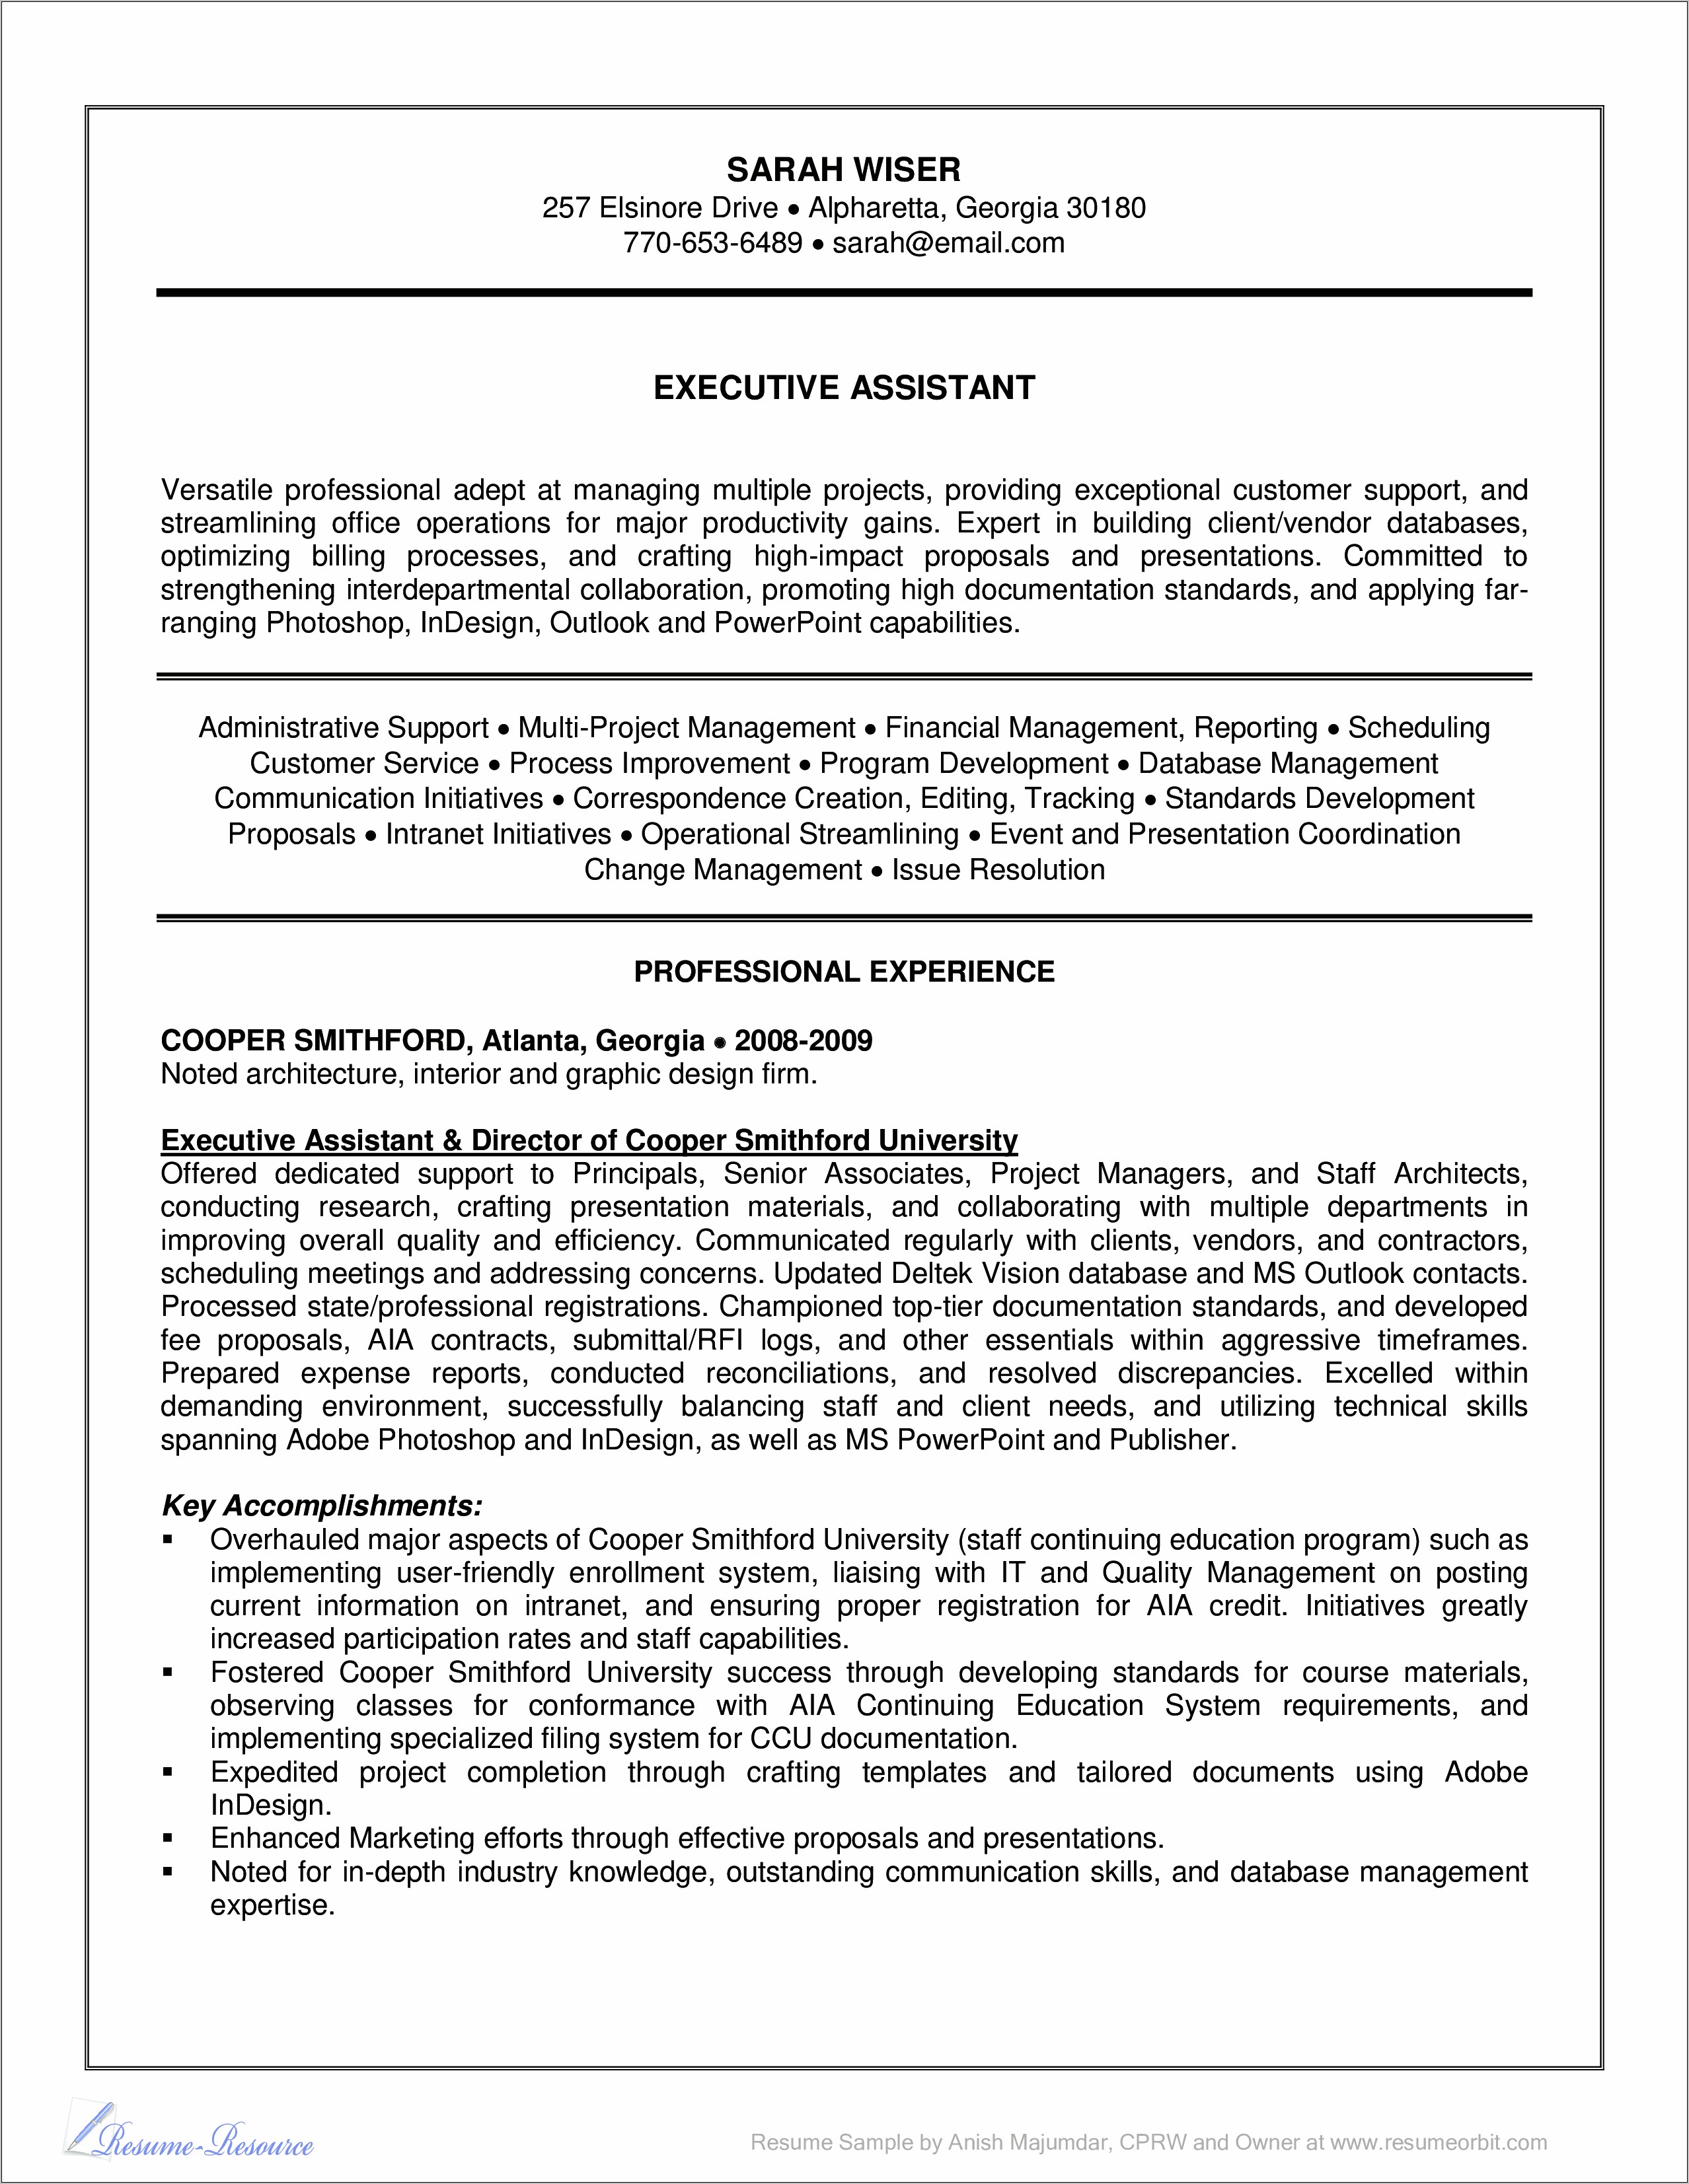 Professional Resume Template For Executive Assistant